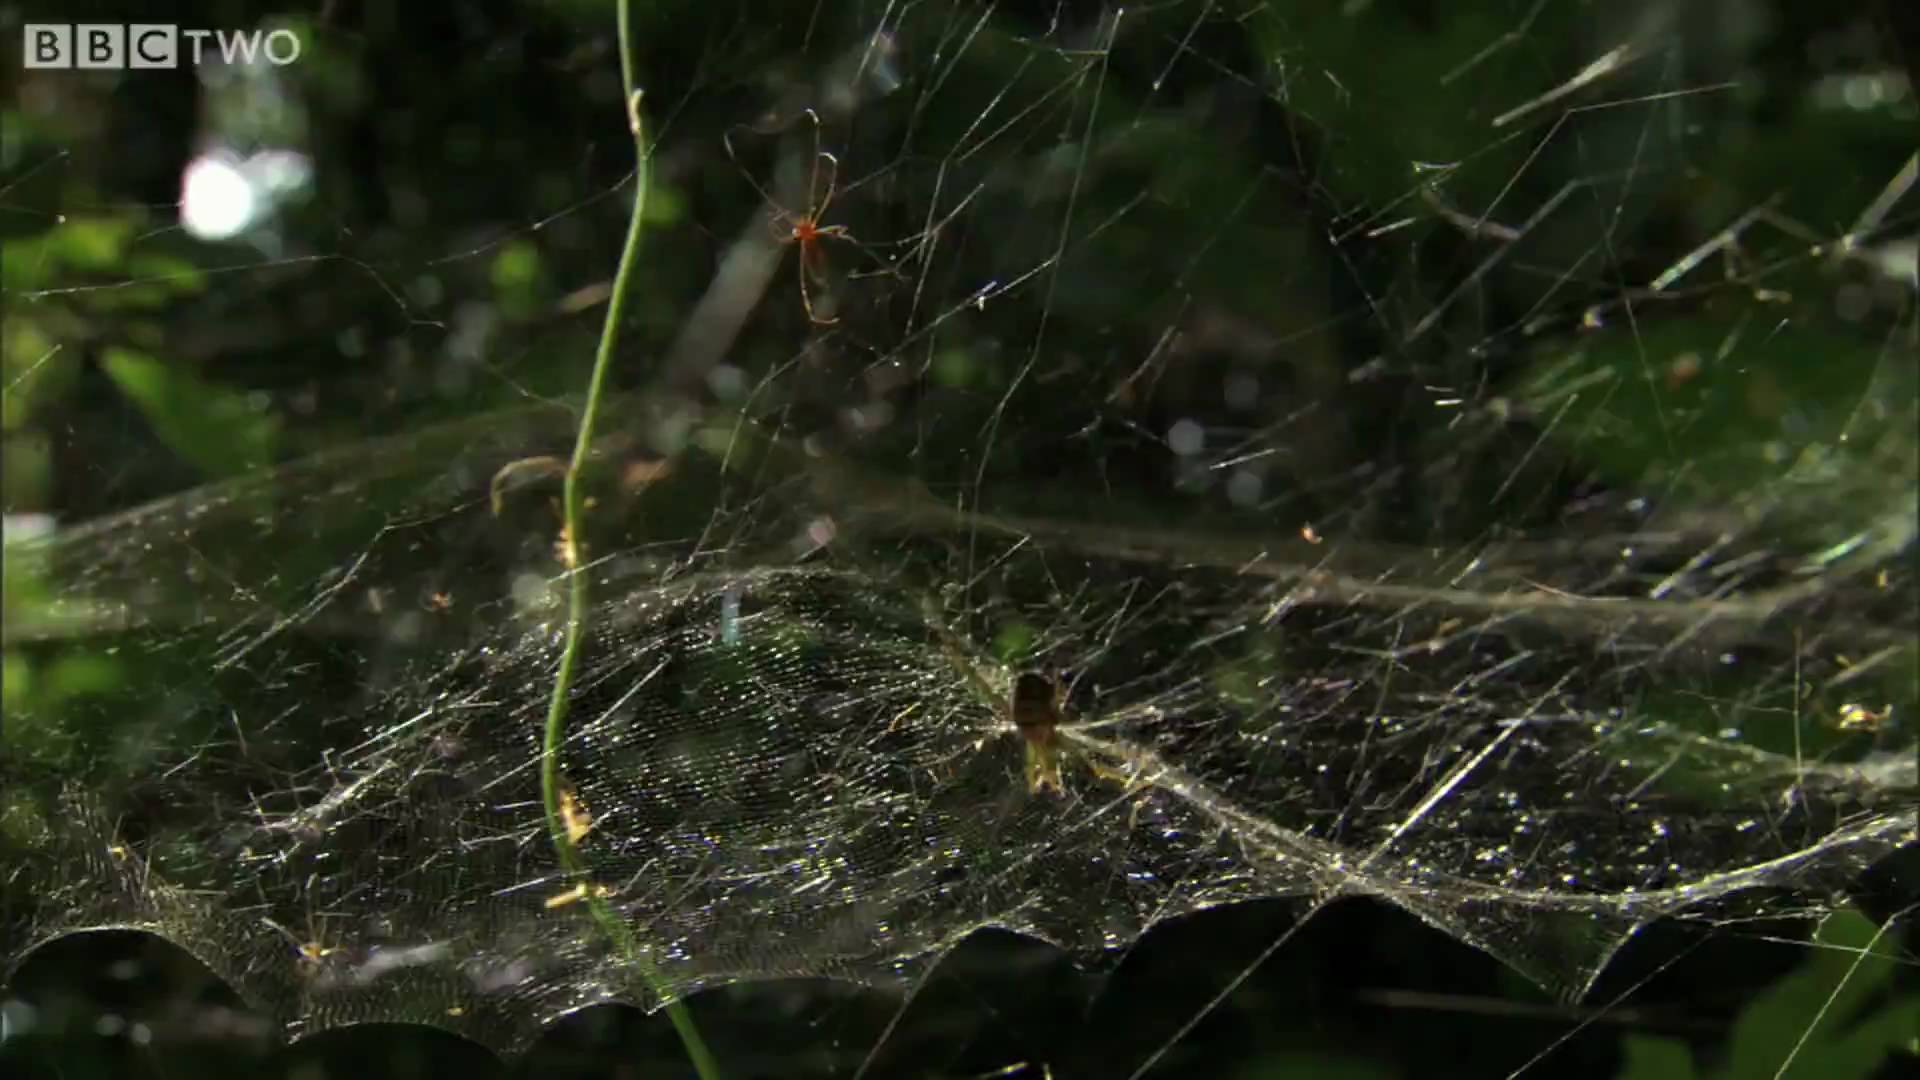 HD: Spider Web Fishing - South Pacific - BBC Two - YouTube